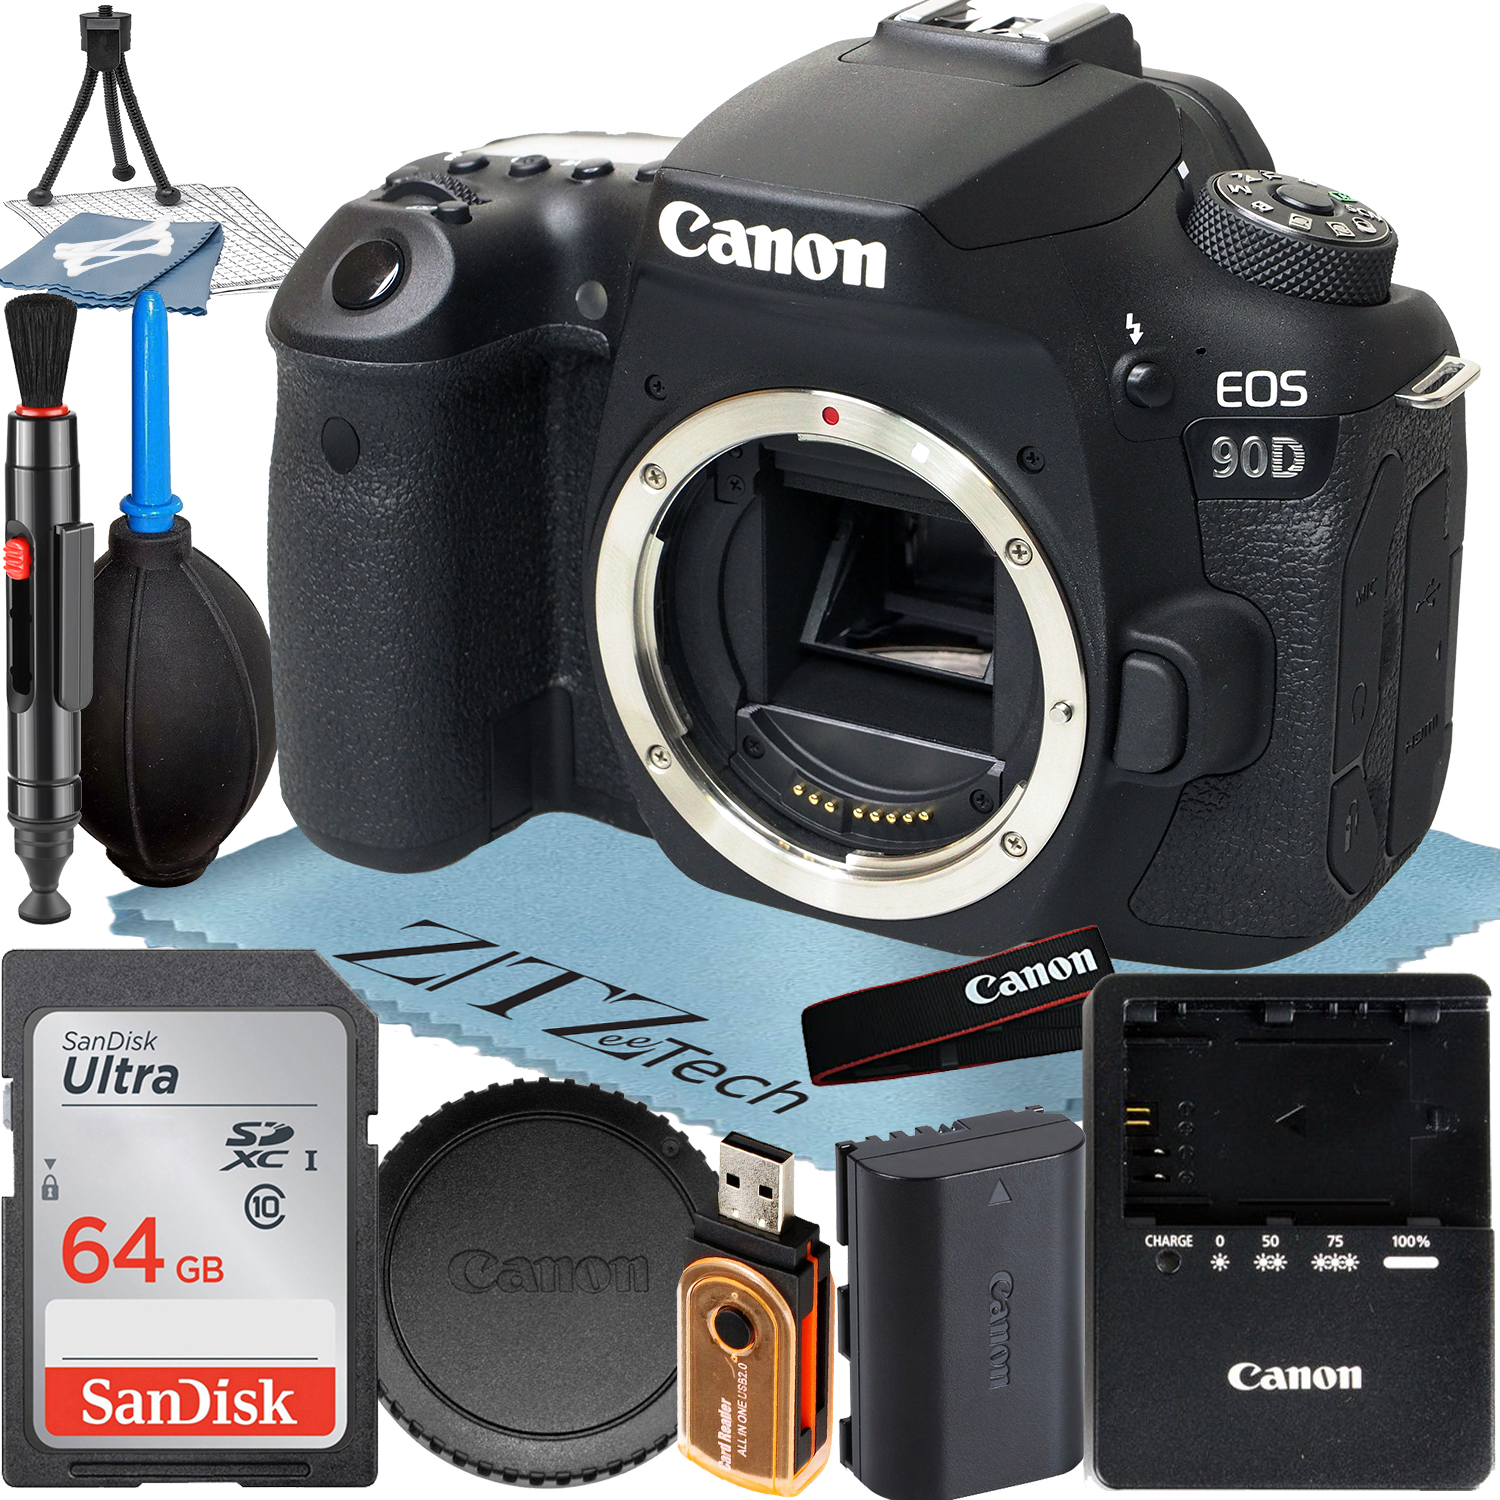 Canon EOS 90D DSLR Camera (Body Only) with 32.5MP CMOS Sensor + SanDisk 64GB Memory Card + ZeeTech Accessory Bundle